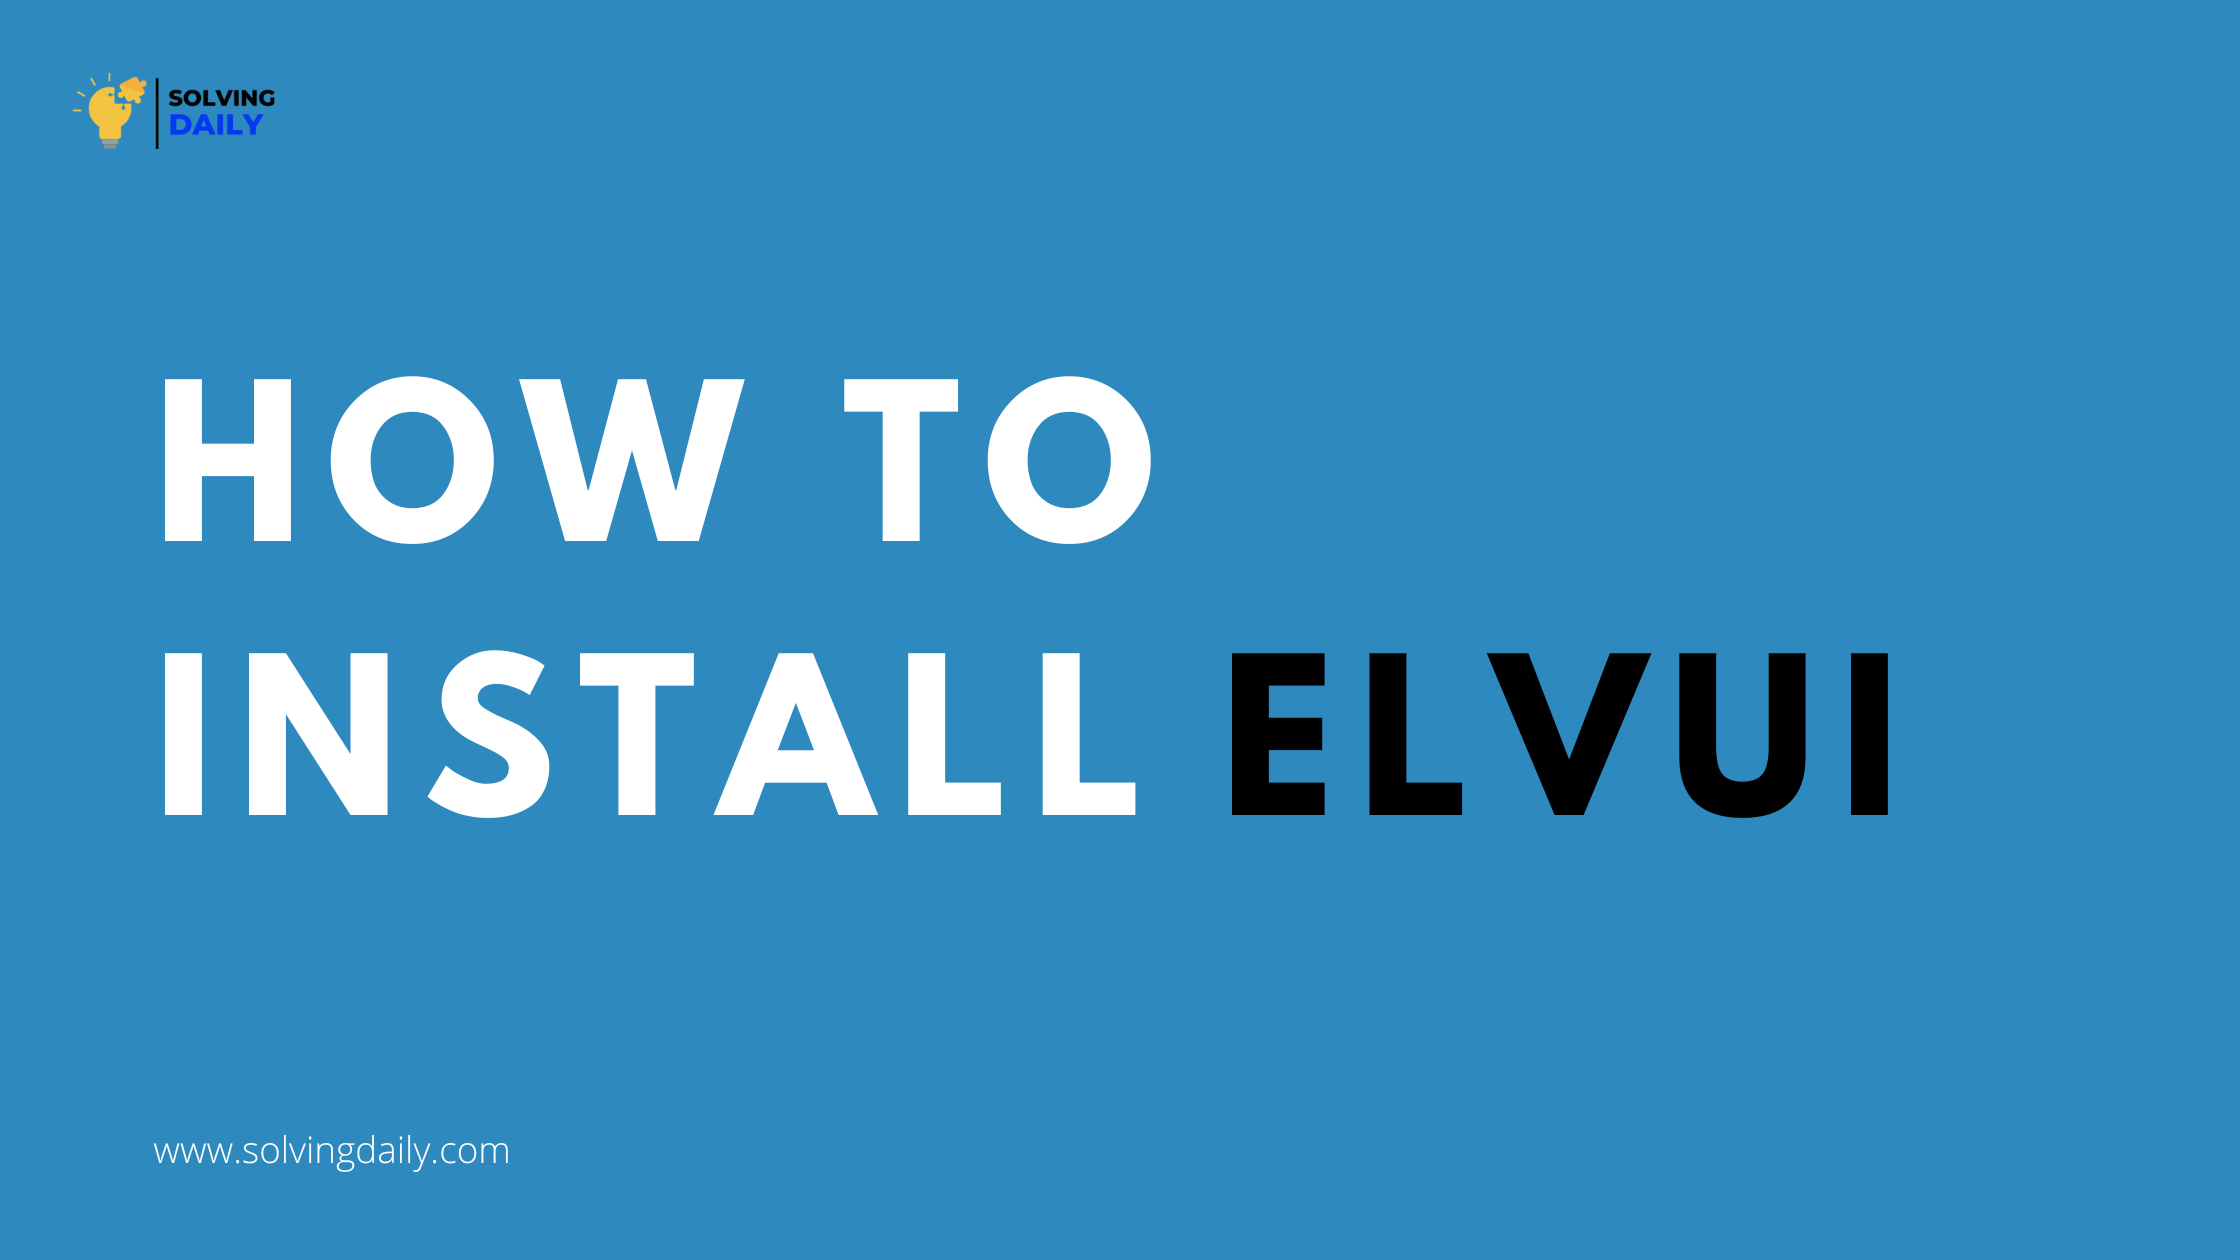 How to Install Elvui